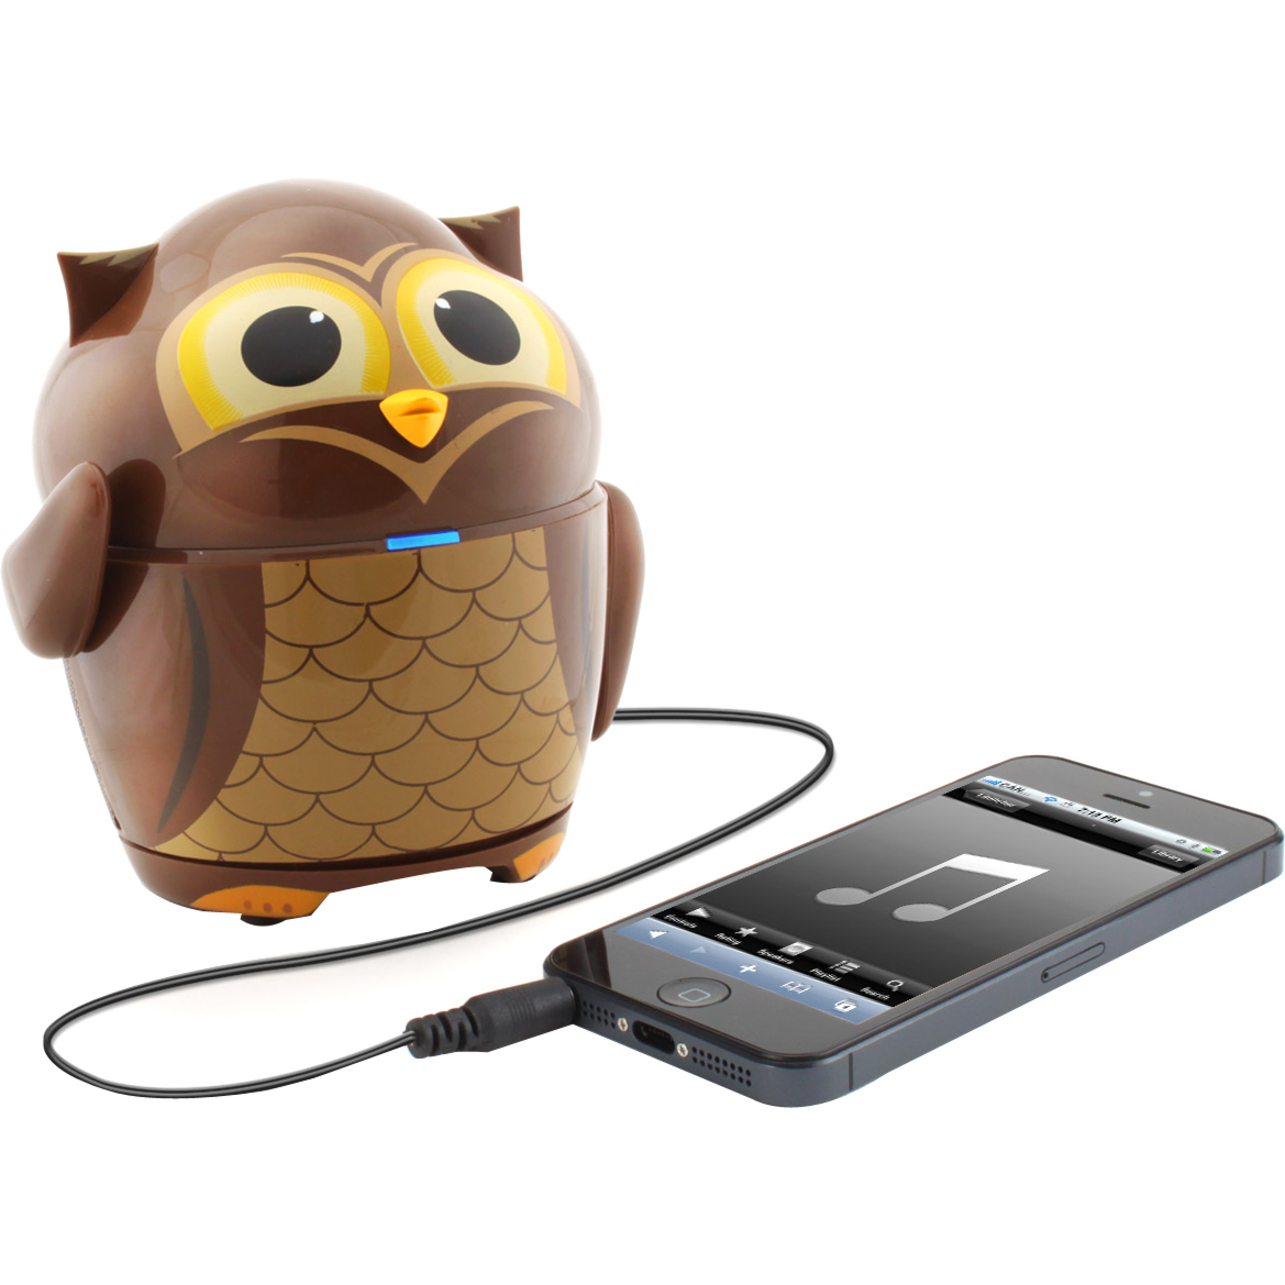 GOgroove Groove Pal GG-PAL-OWL 2.0 Portable Speaker System, 4 W RMS, Brown - image 5 of 7